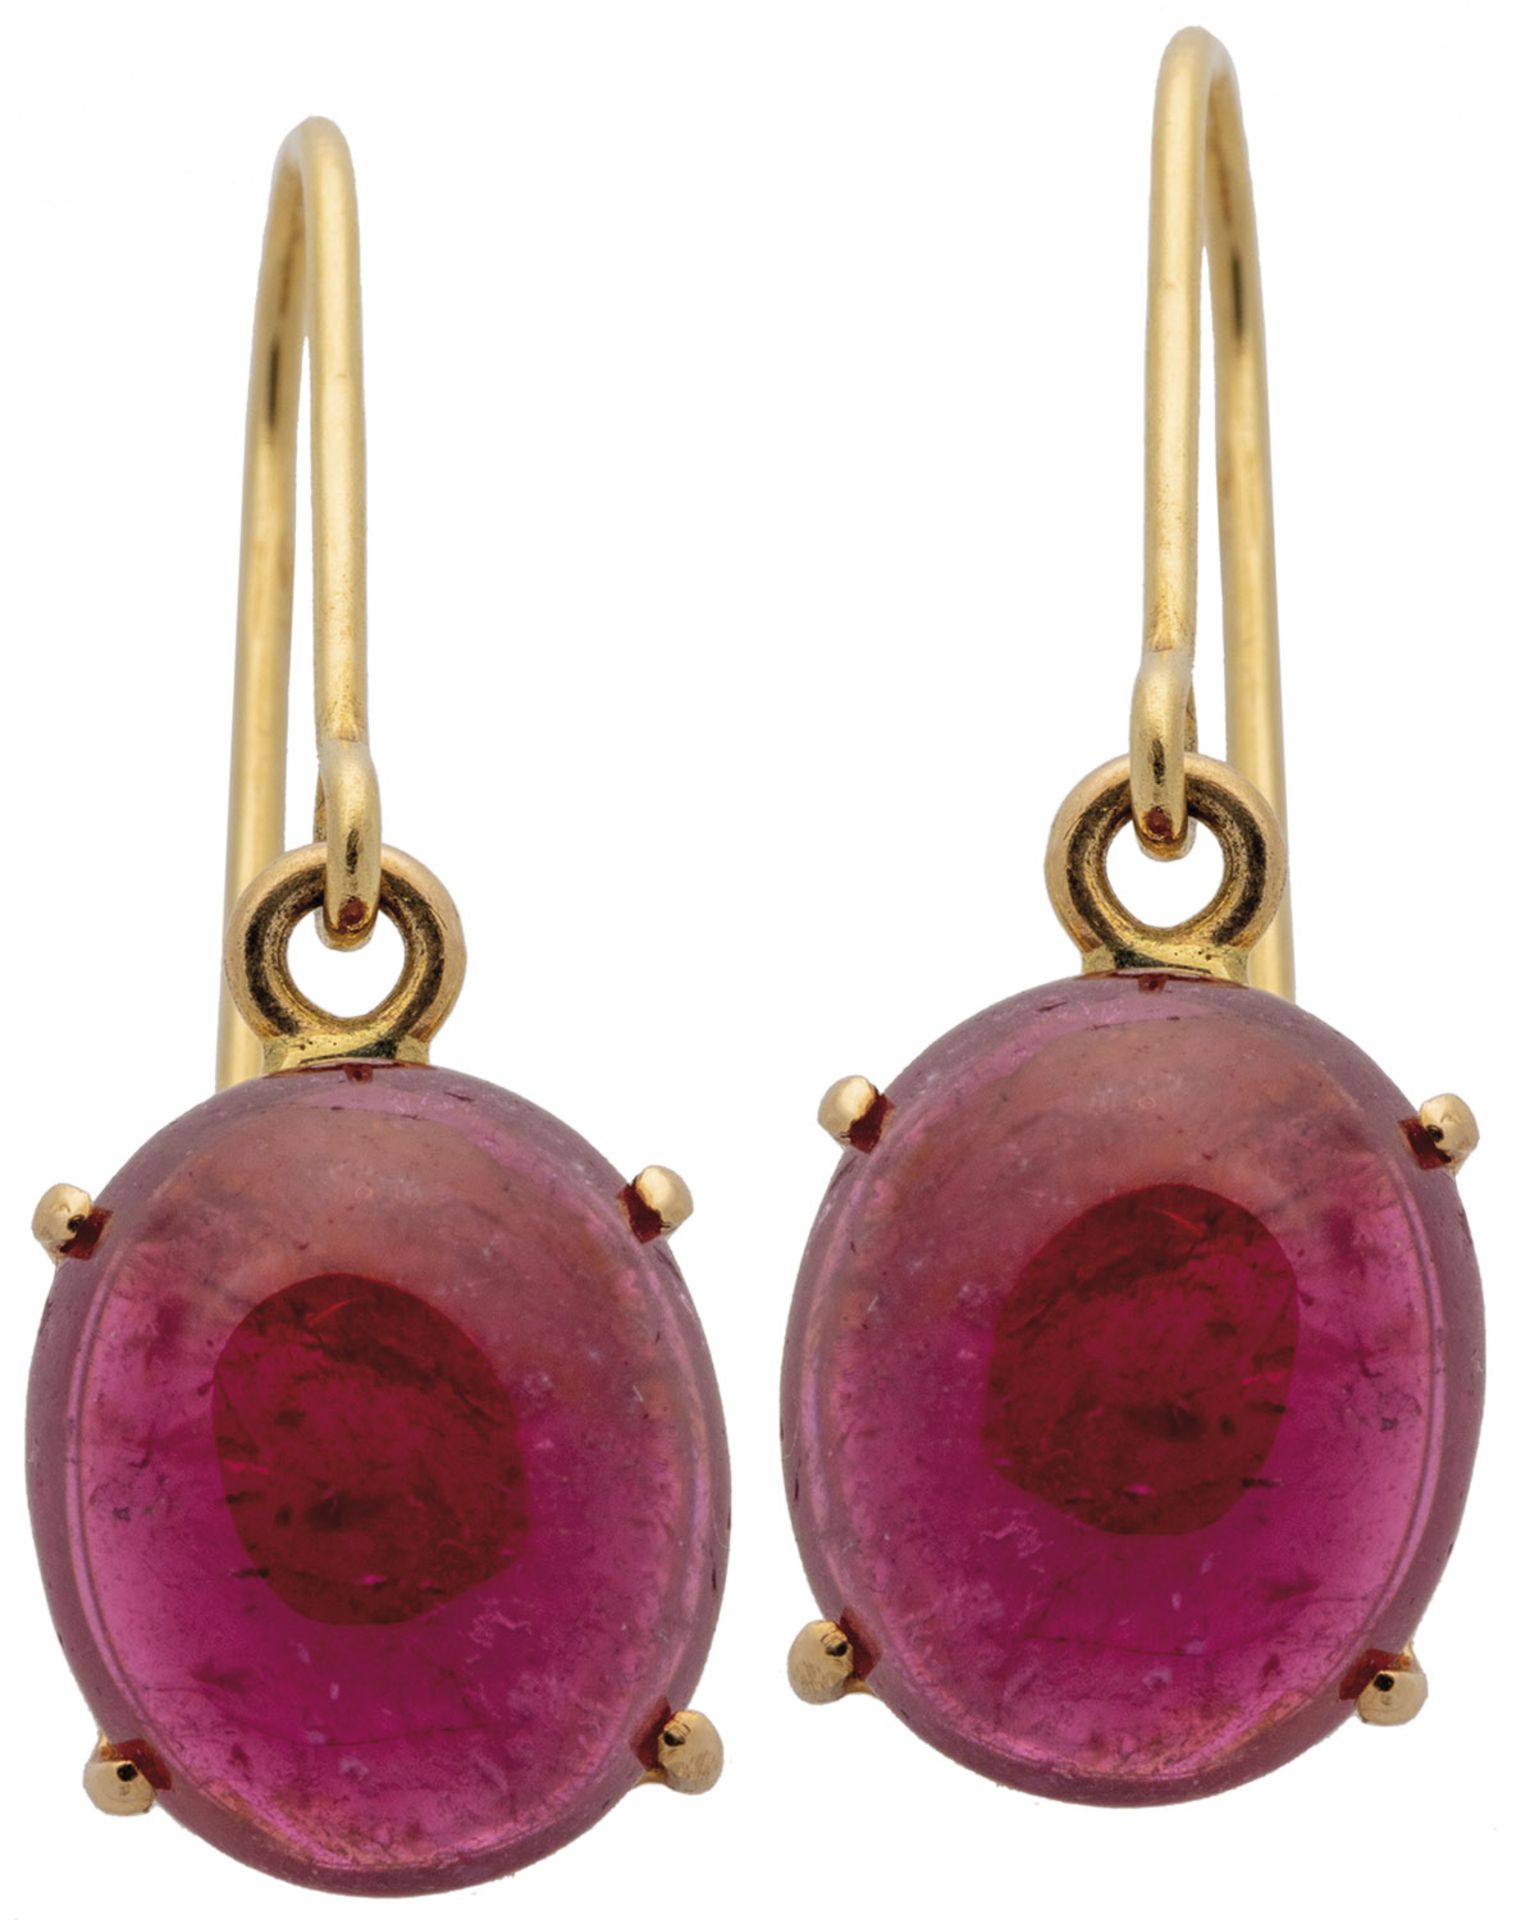 Pair of earrings with tourmaline cabochon